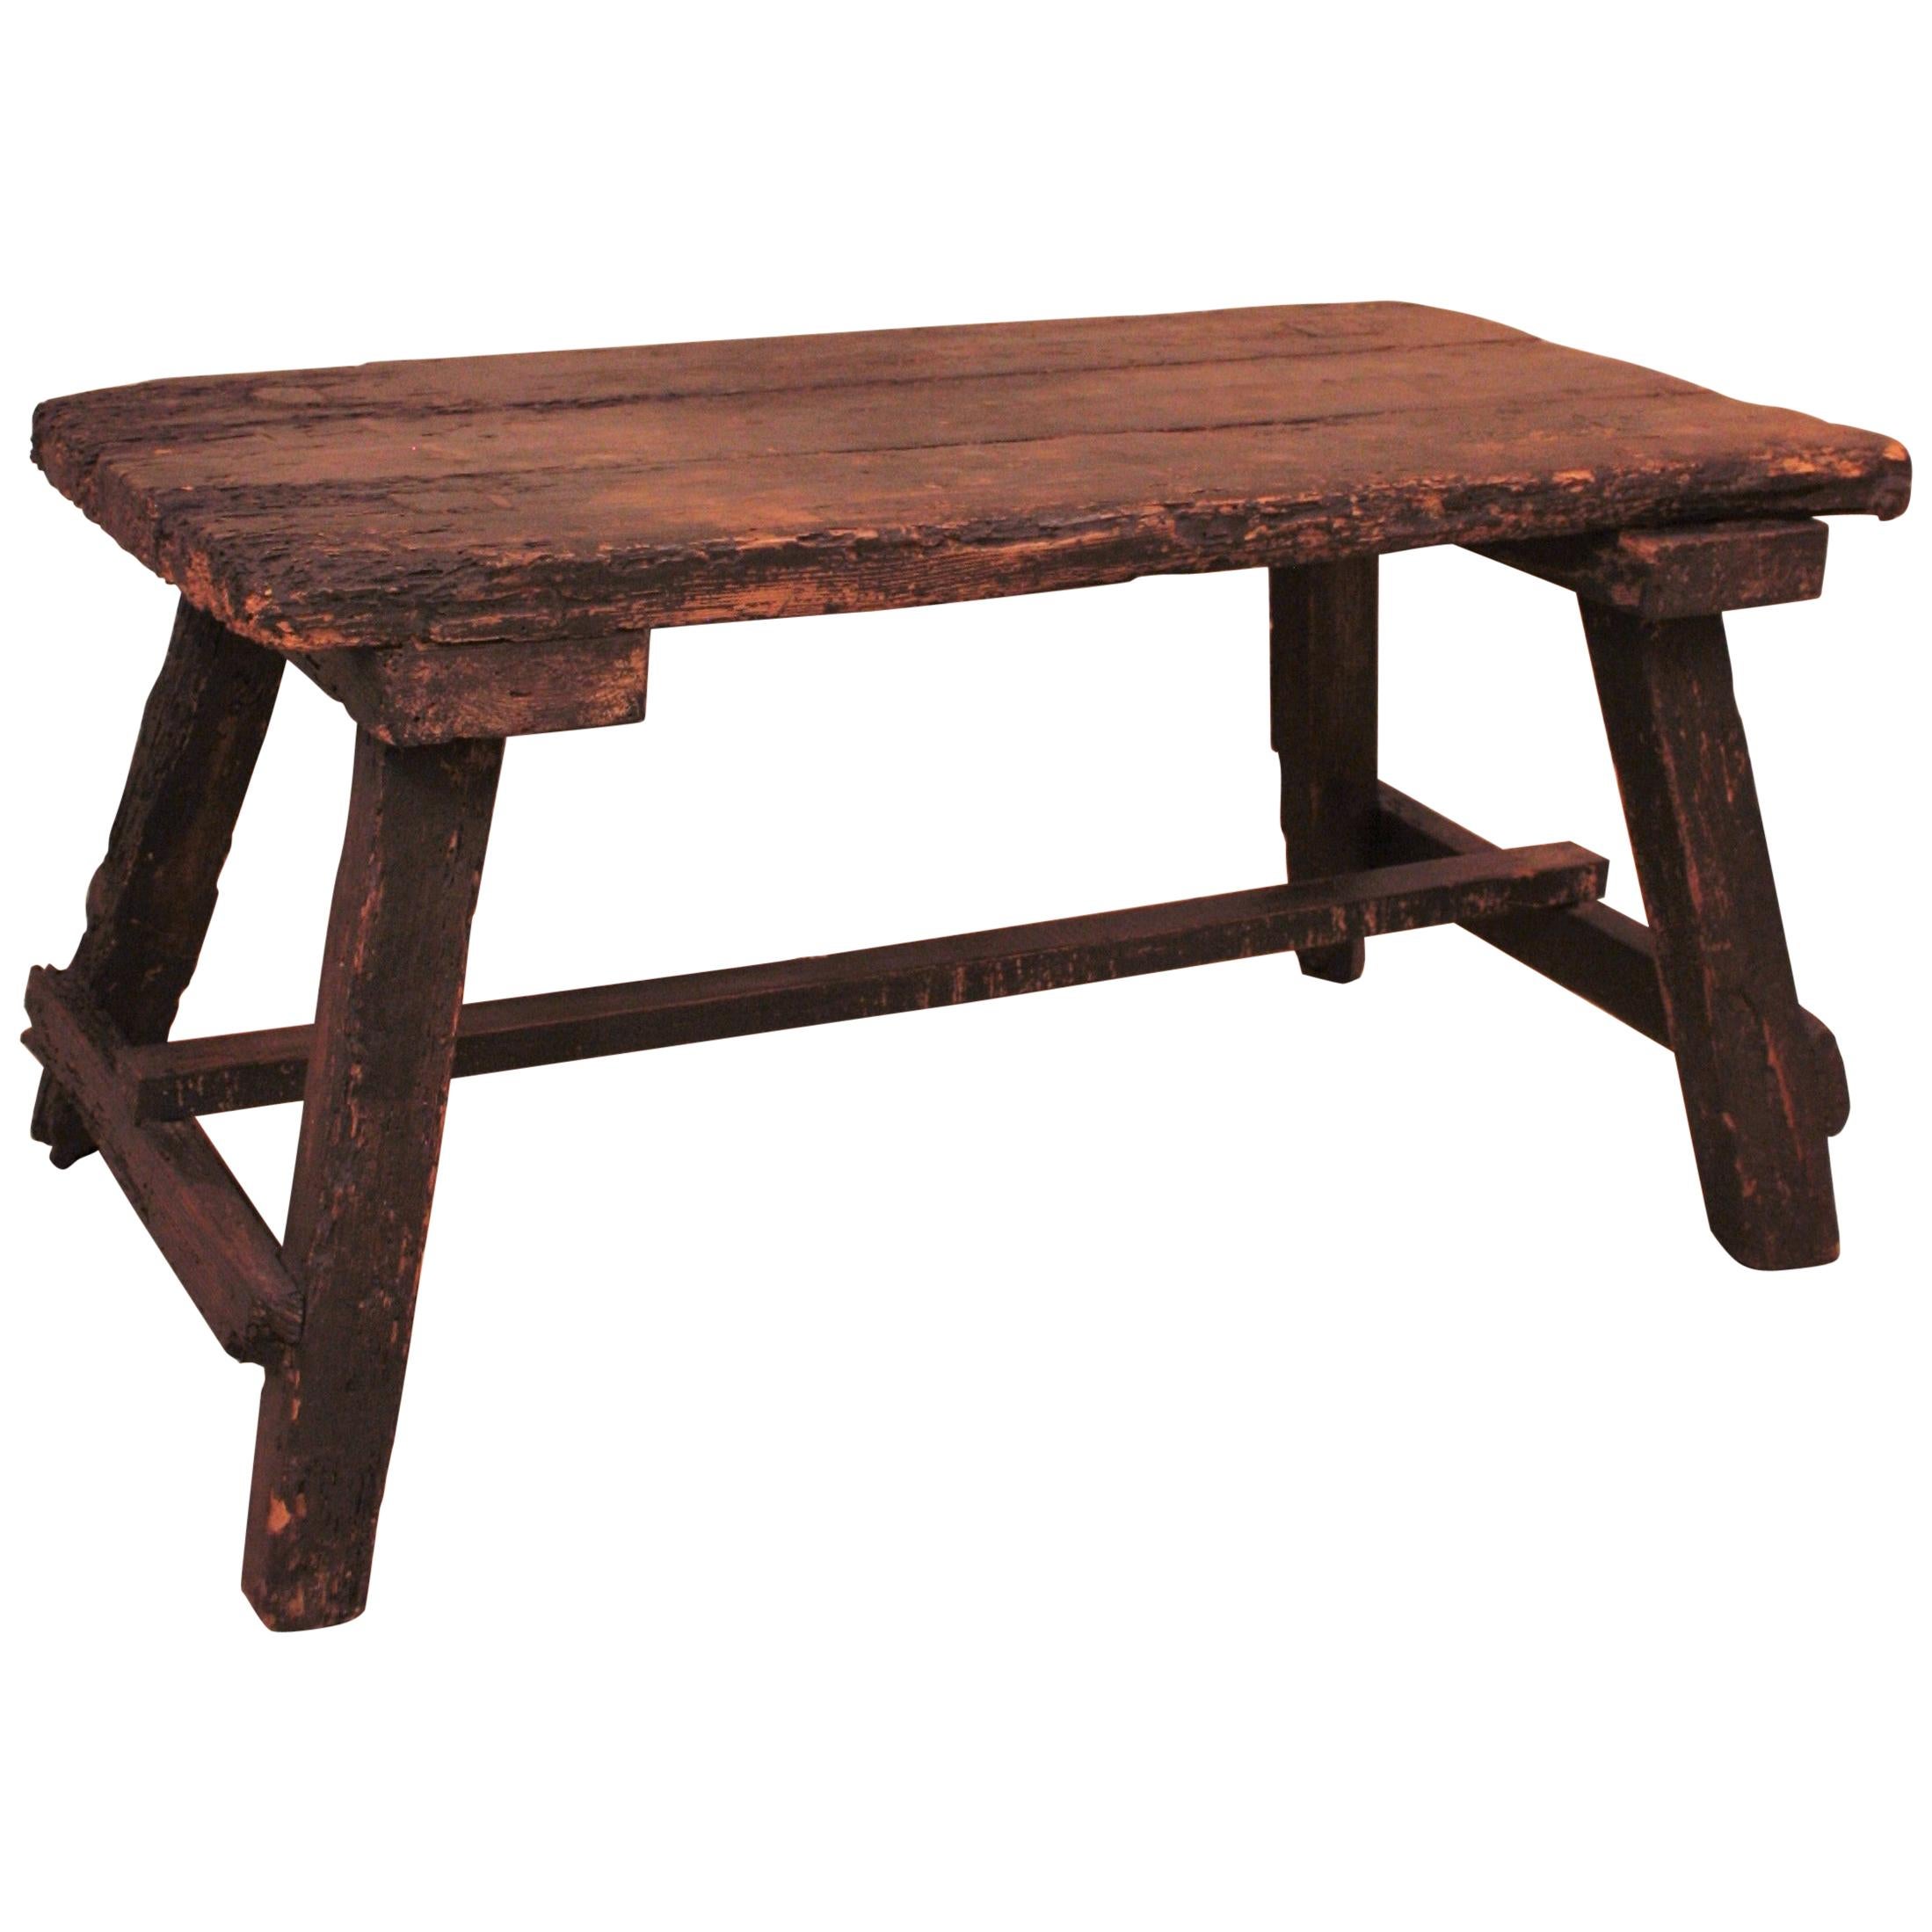 Beautiful primive Spanish pine wood low table.
This table is rustically elegant; it shows beautiful signs of wear and character and all the taste of the ancient Spanish furniture. It can be used as side table, end table or coffee table in a rustic